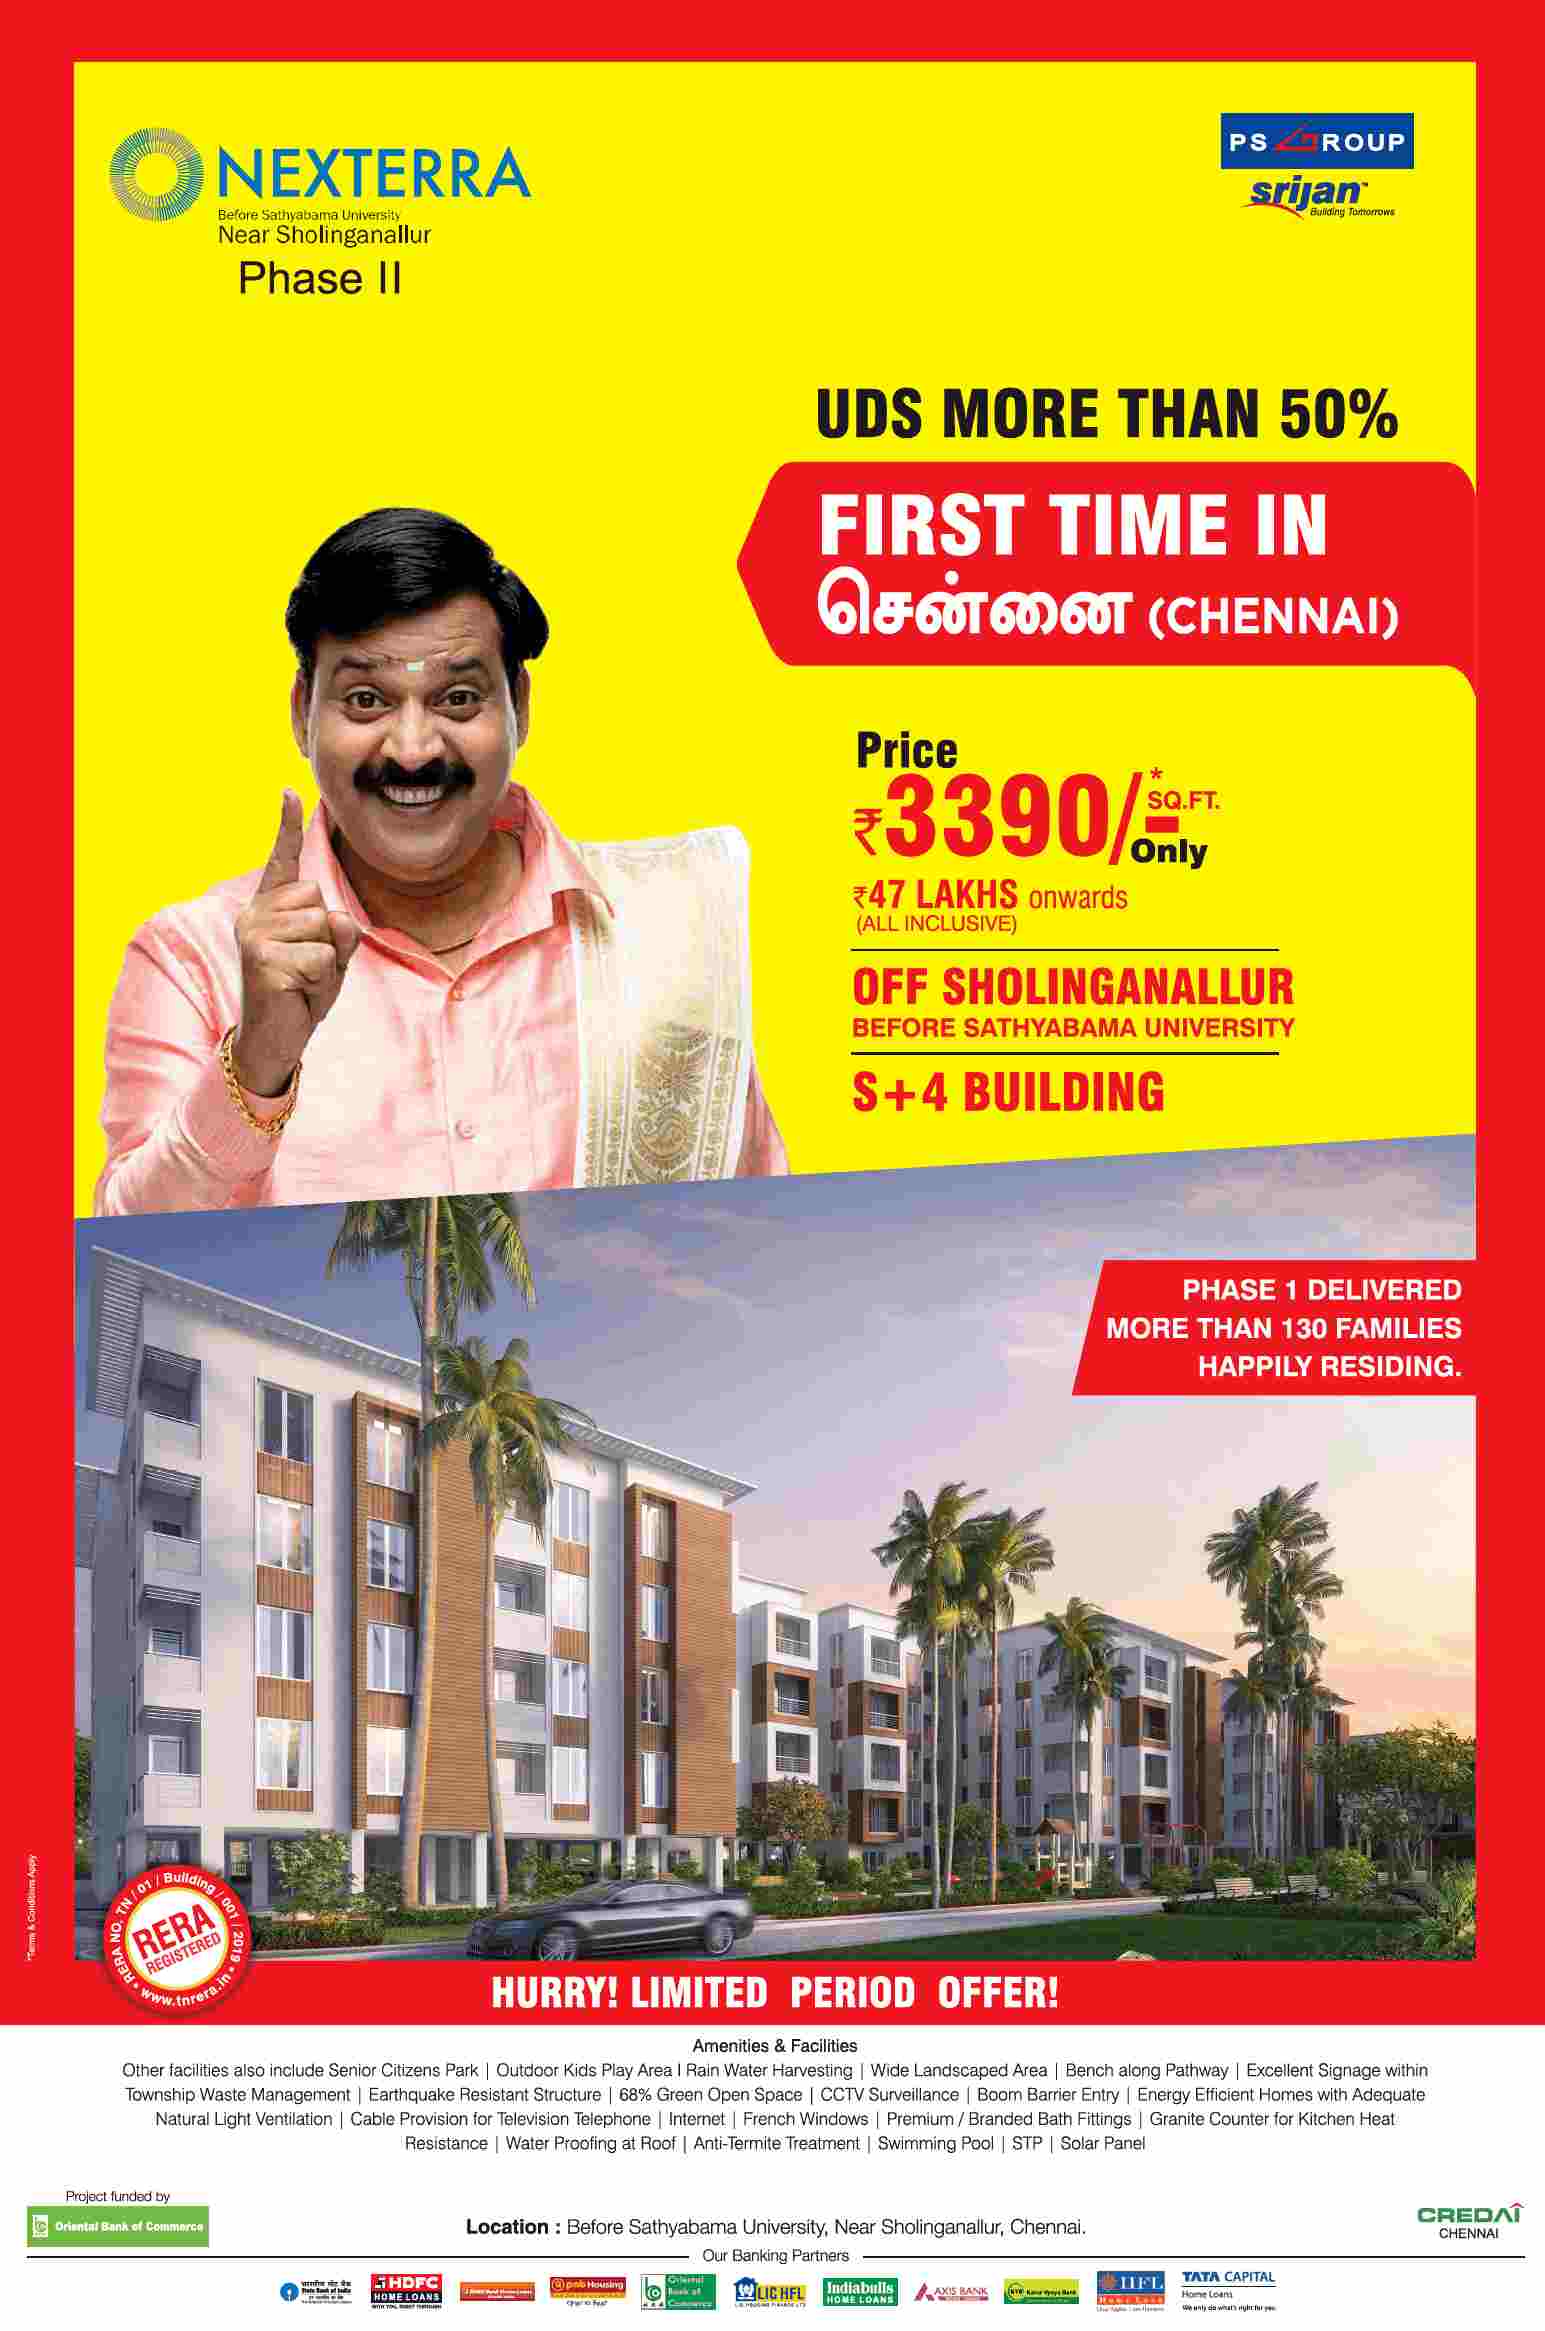 Pay Rs 3390 per sqft to book your abode at PS Srijan Nexterra in Chennai Update